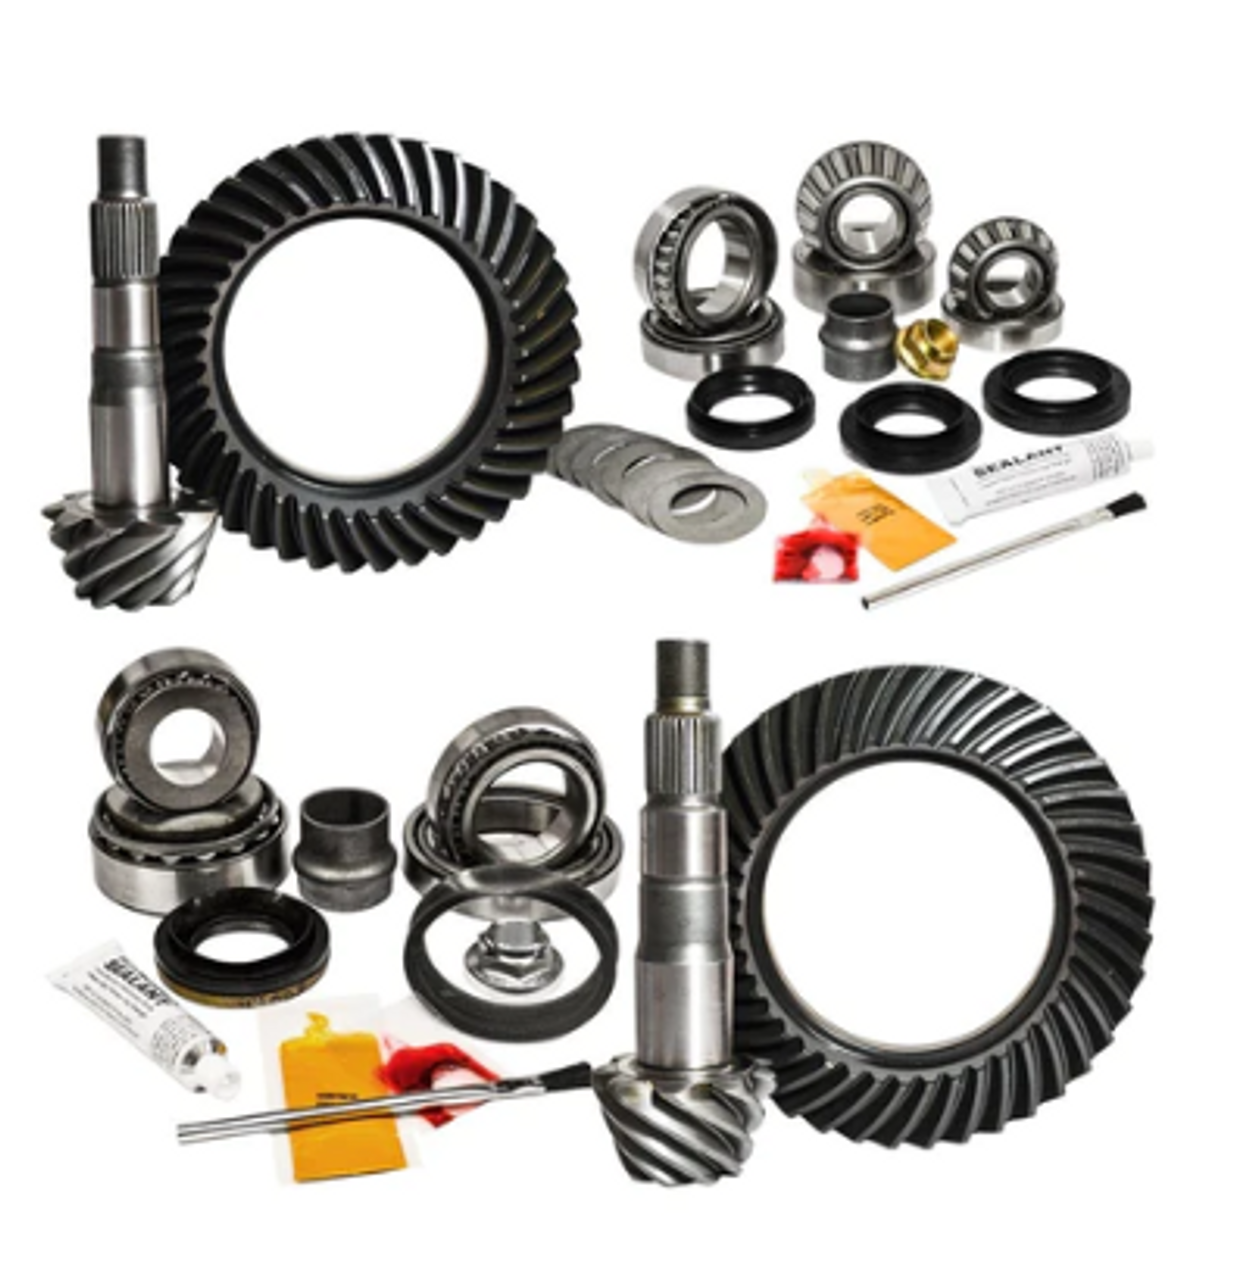 Nitro Gear & Axle GPFJCRUISER-4.88-3 Front and Rear Gear Package Kit for Toyota 4Runner 2010+